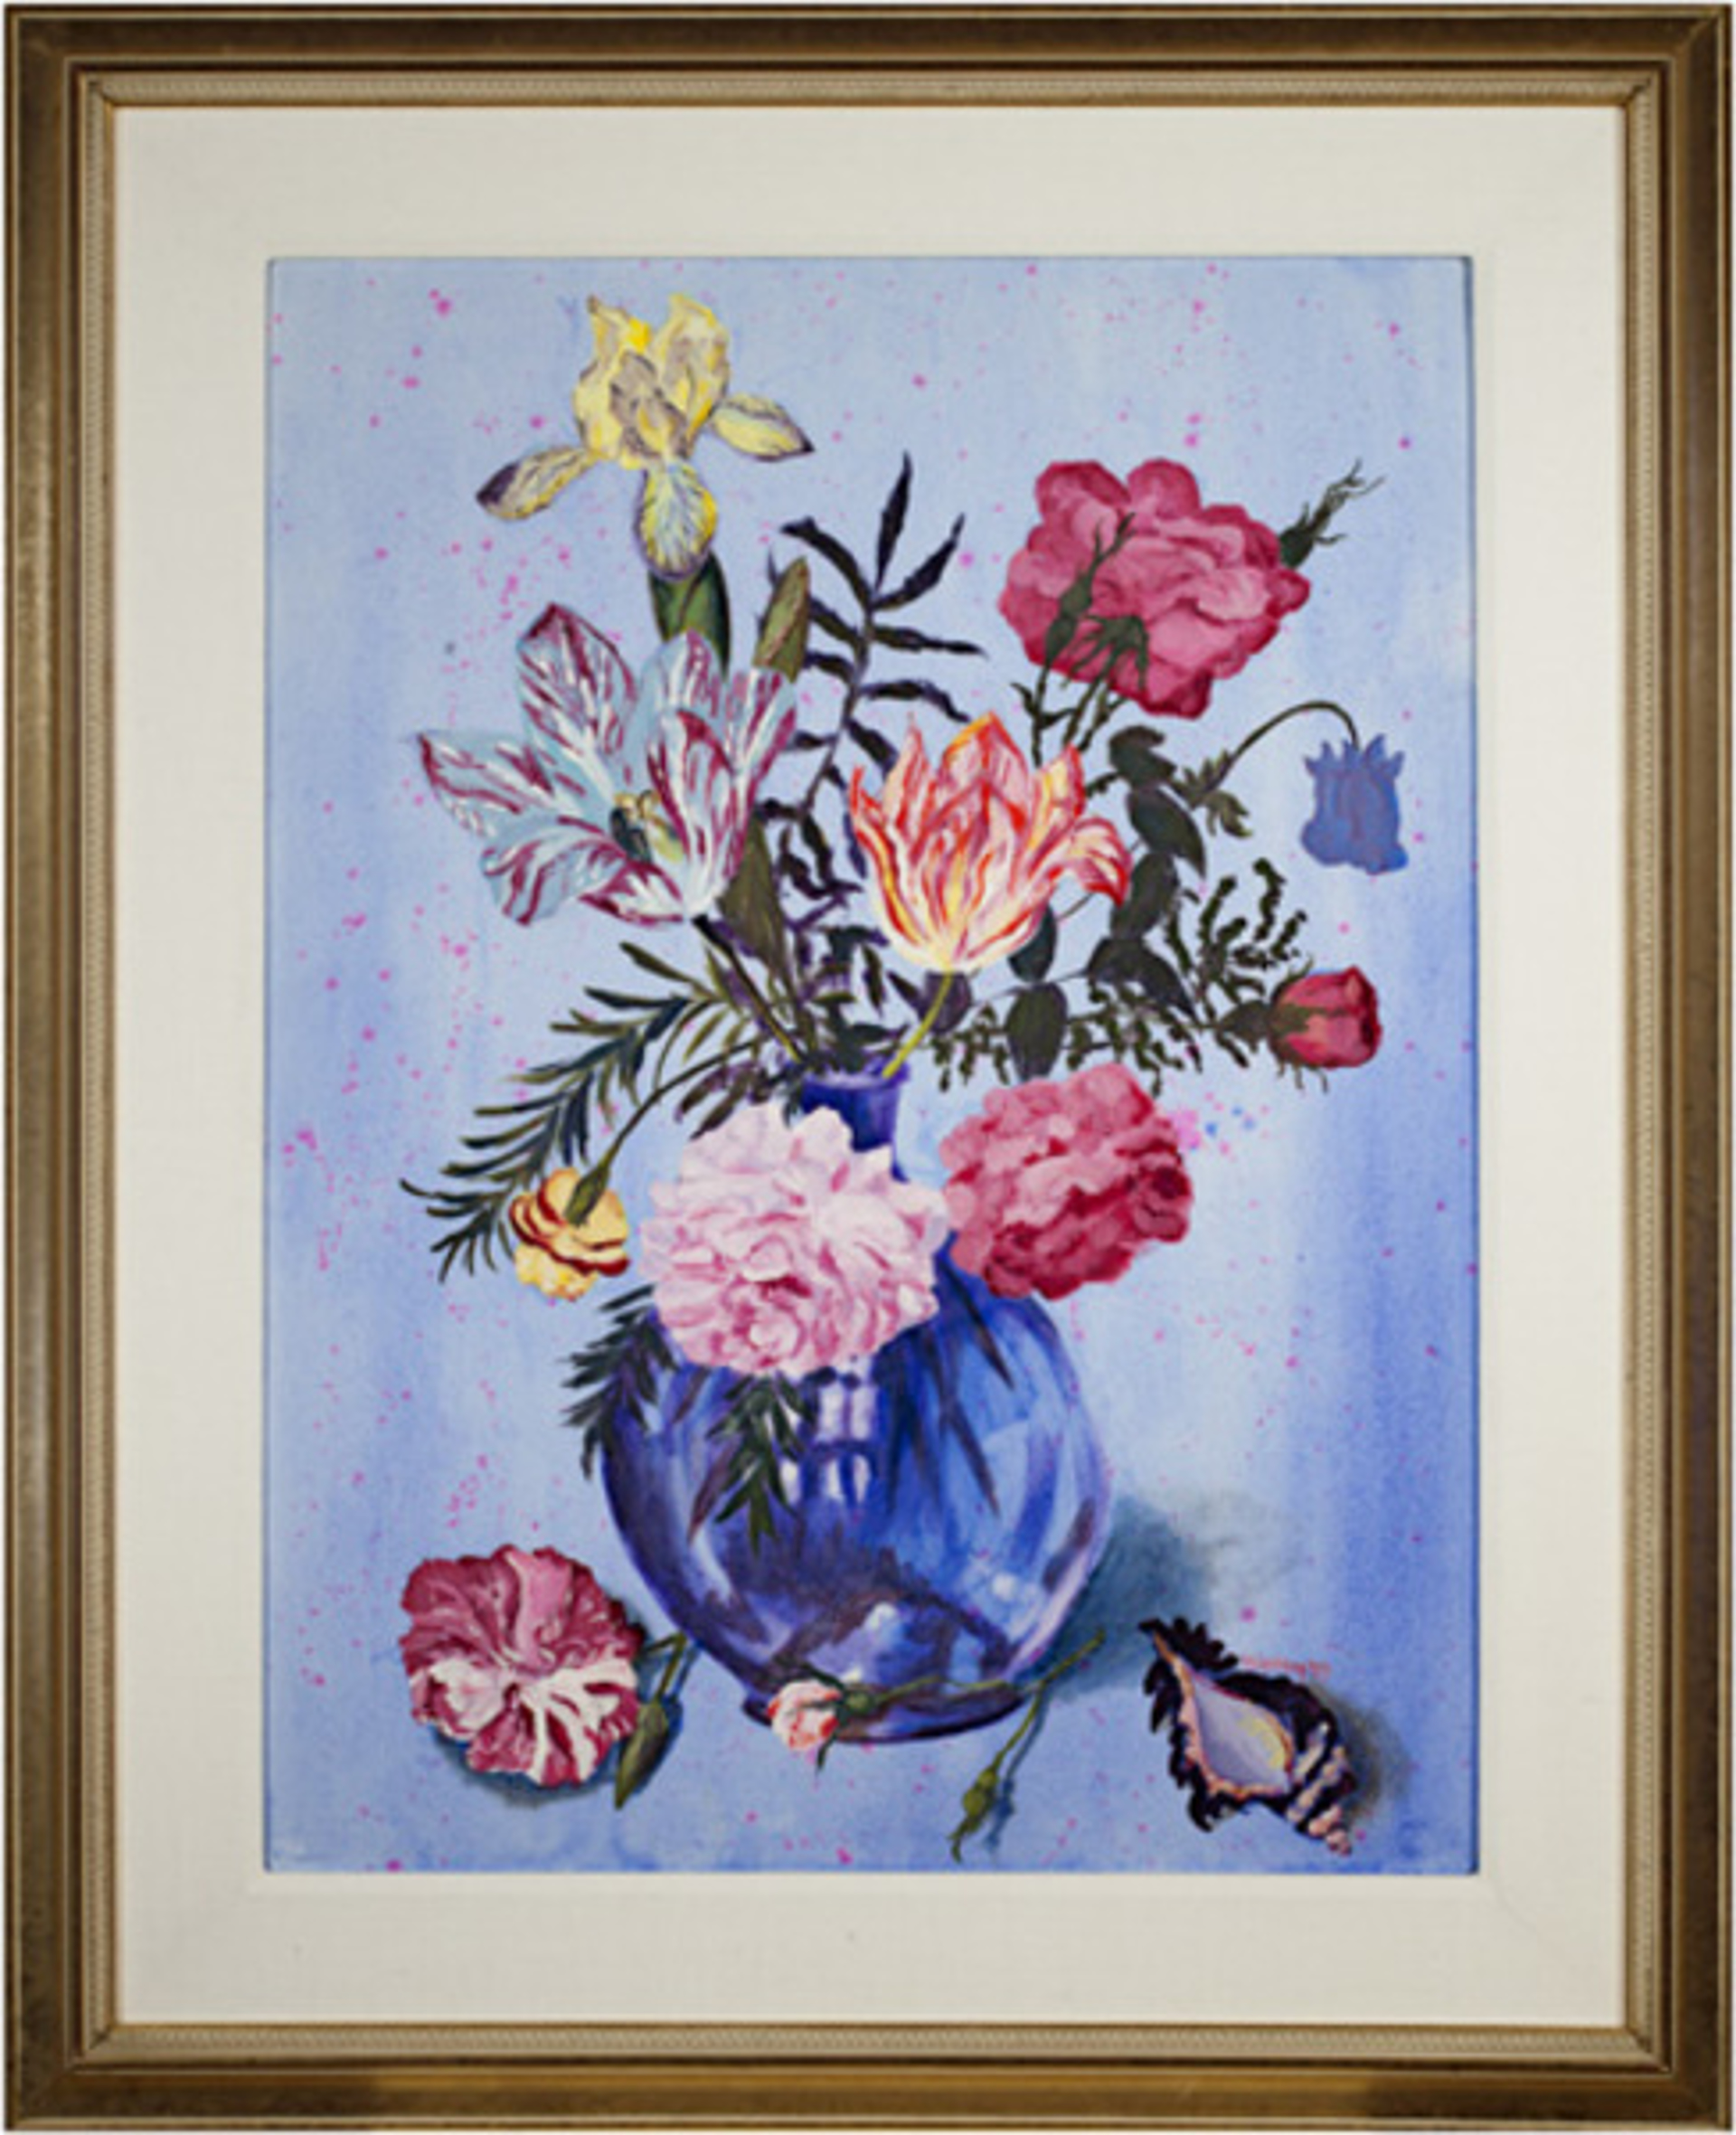 Assortment of Flowers in Blue Vase by Catherine Holmburg